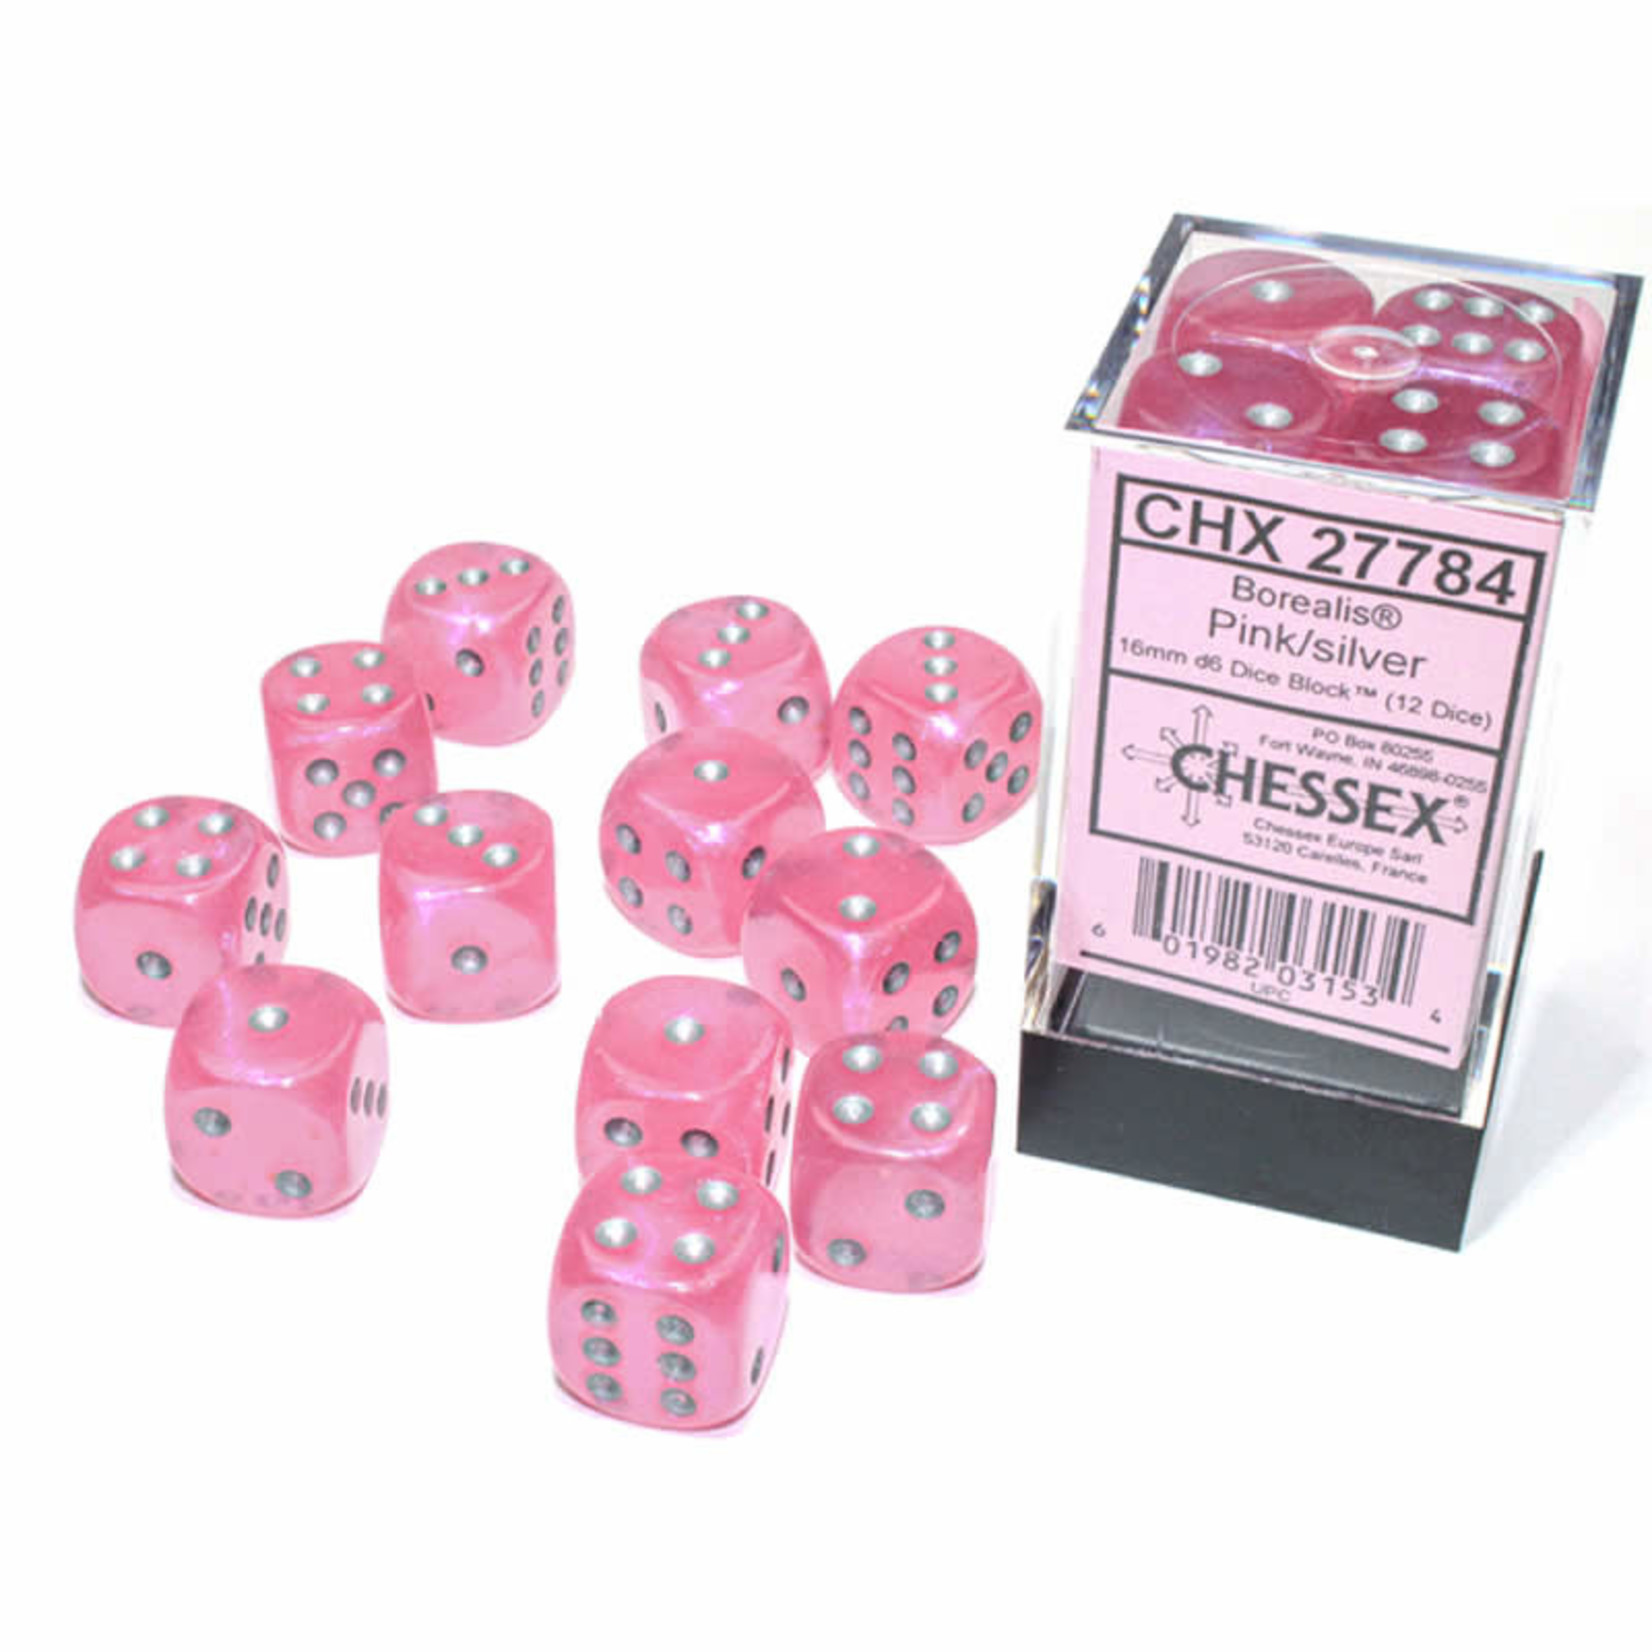 Chessex Borealis 16mm D6 Pink/Silver (12)